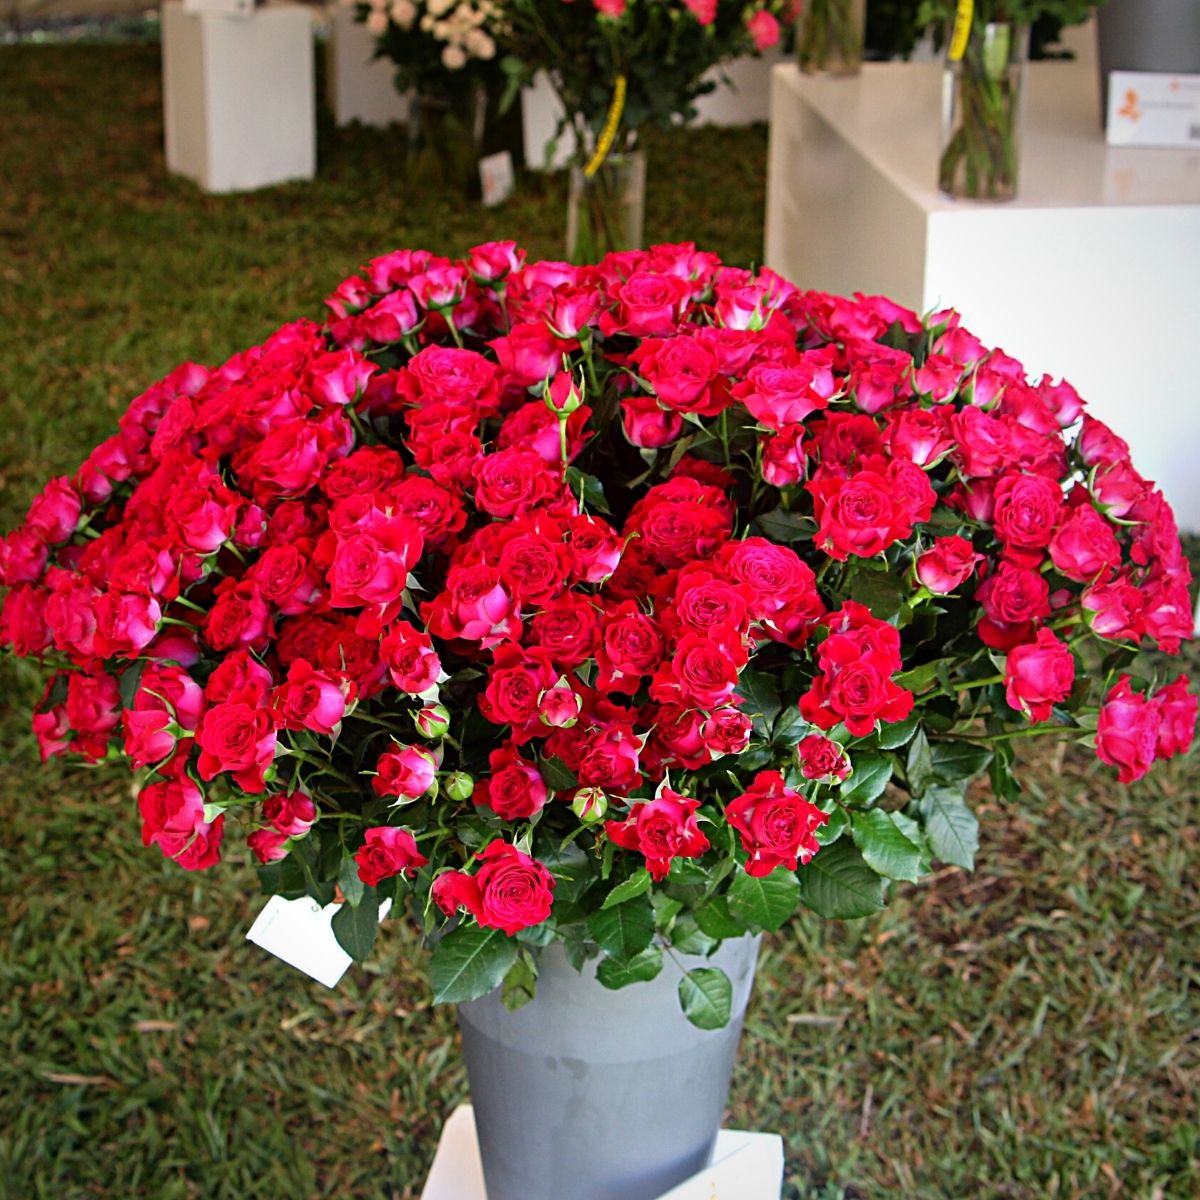 Roses From United Selections at the Interflora World Cup